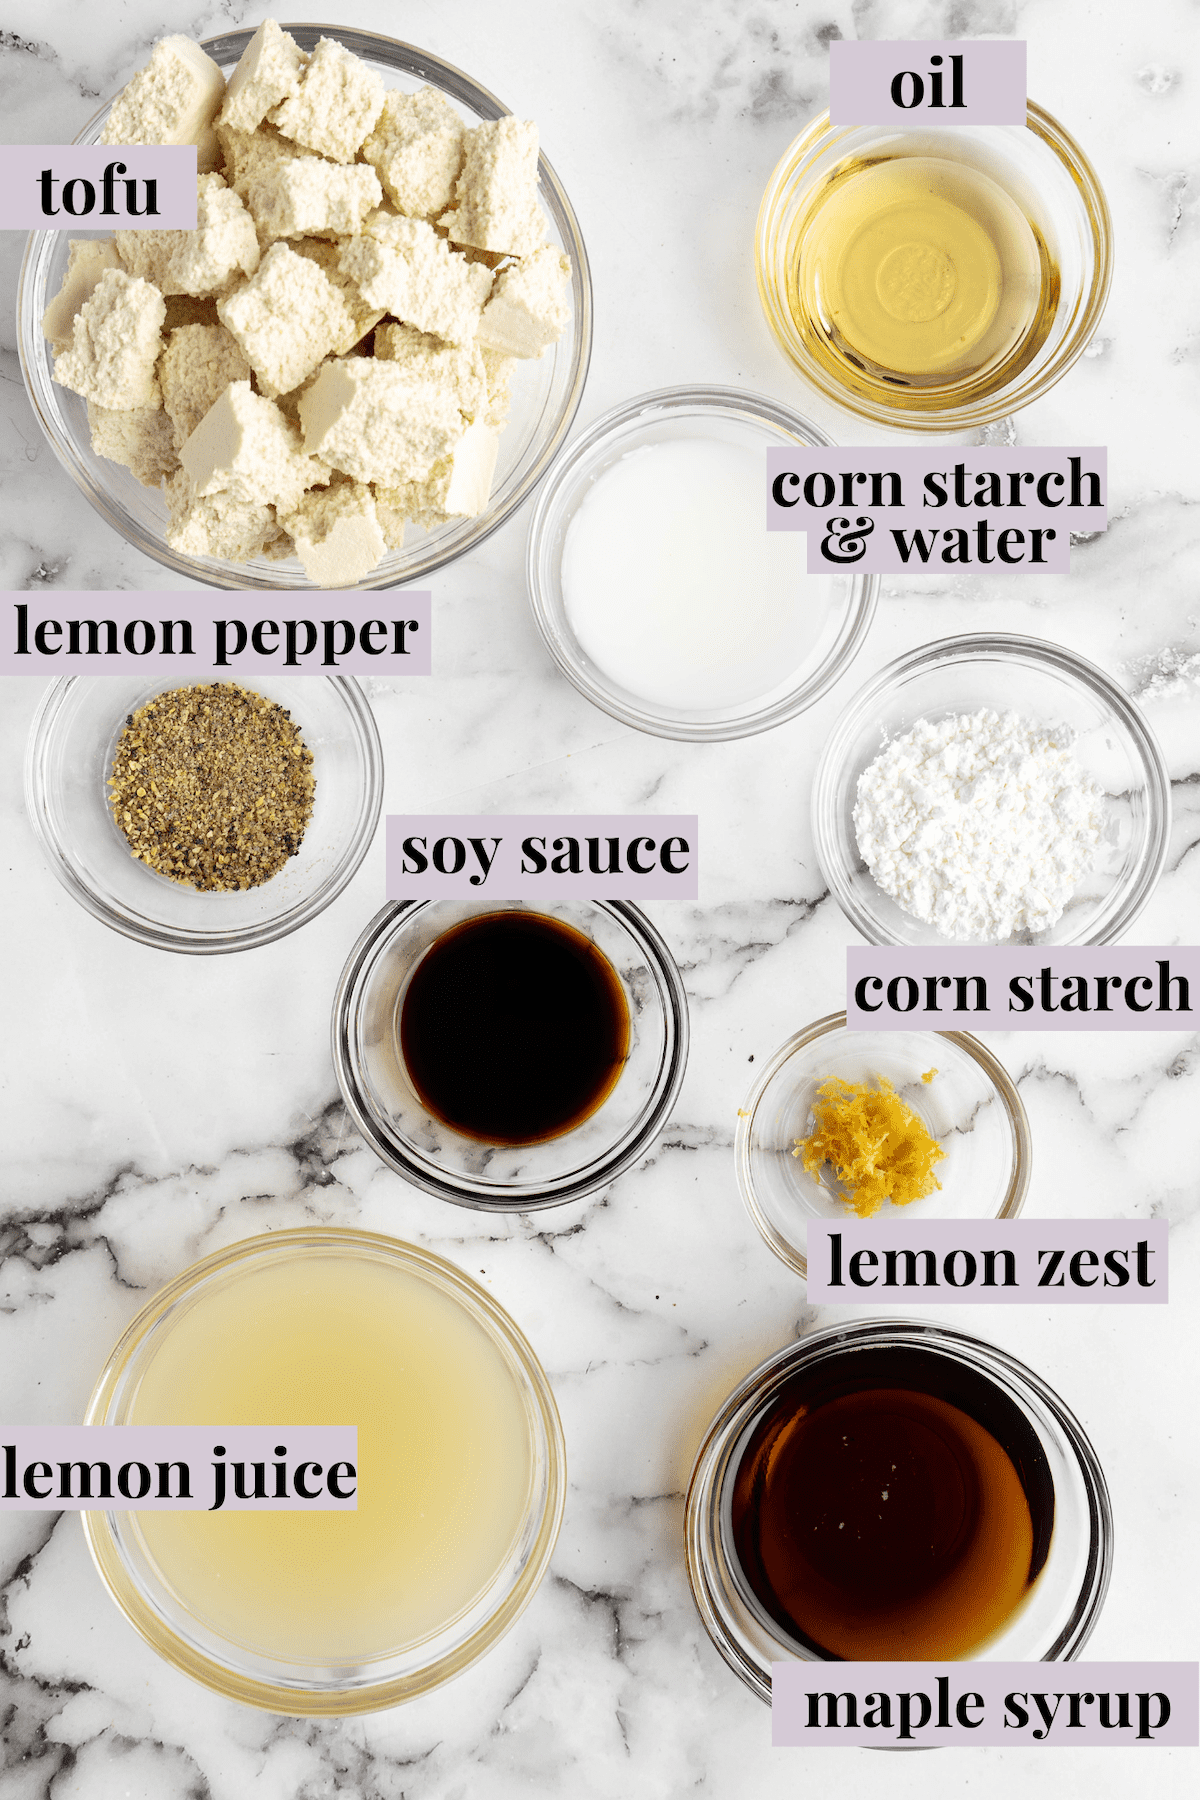 Overhead view of ingredients for lemon pepper tofu with labels